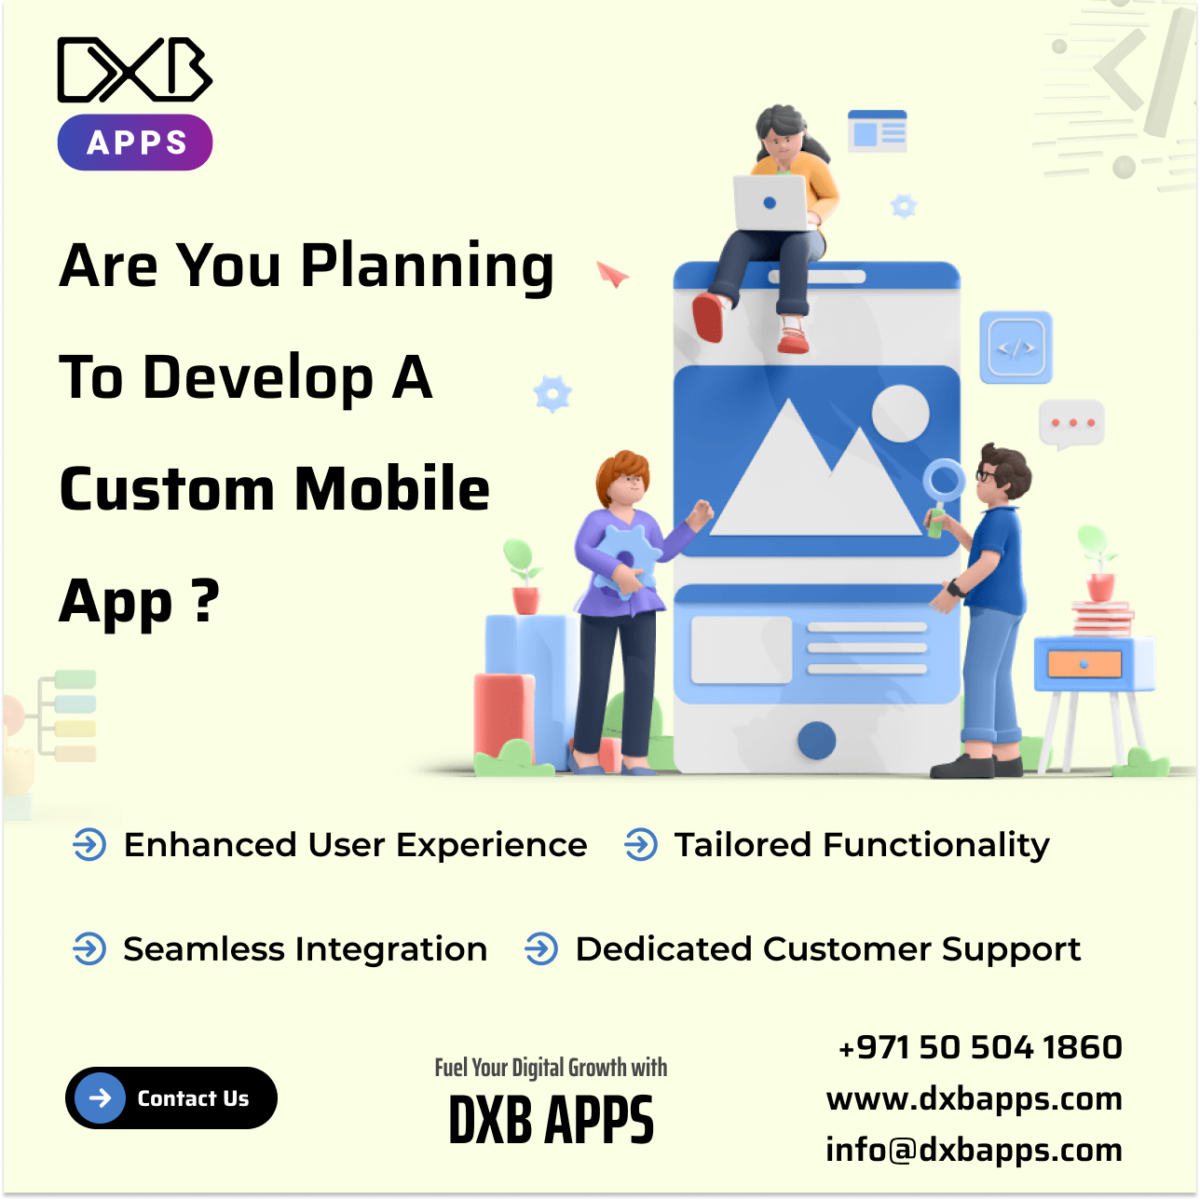 DXB APPS, Indeed A Leading Mobile App Development Company Abu Dhabi